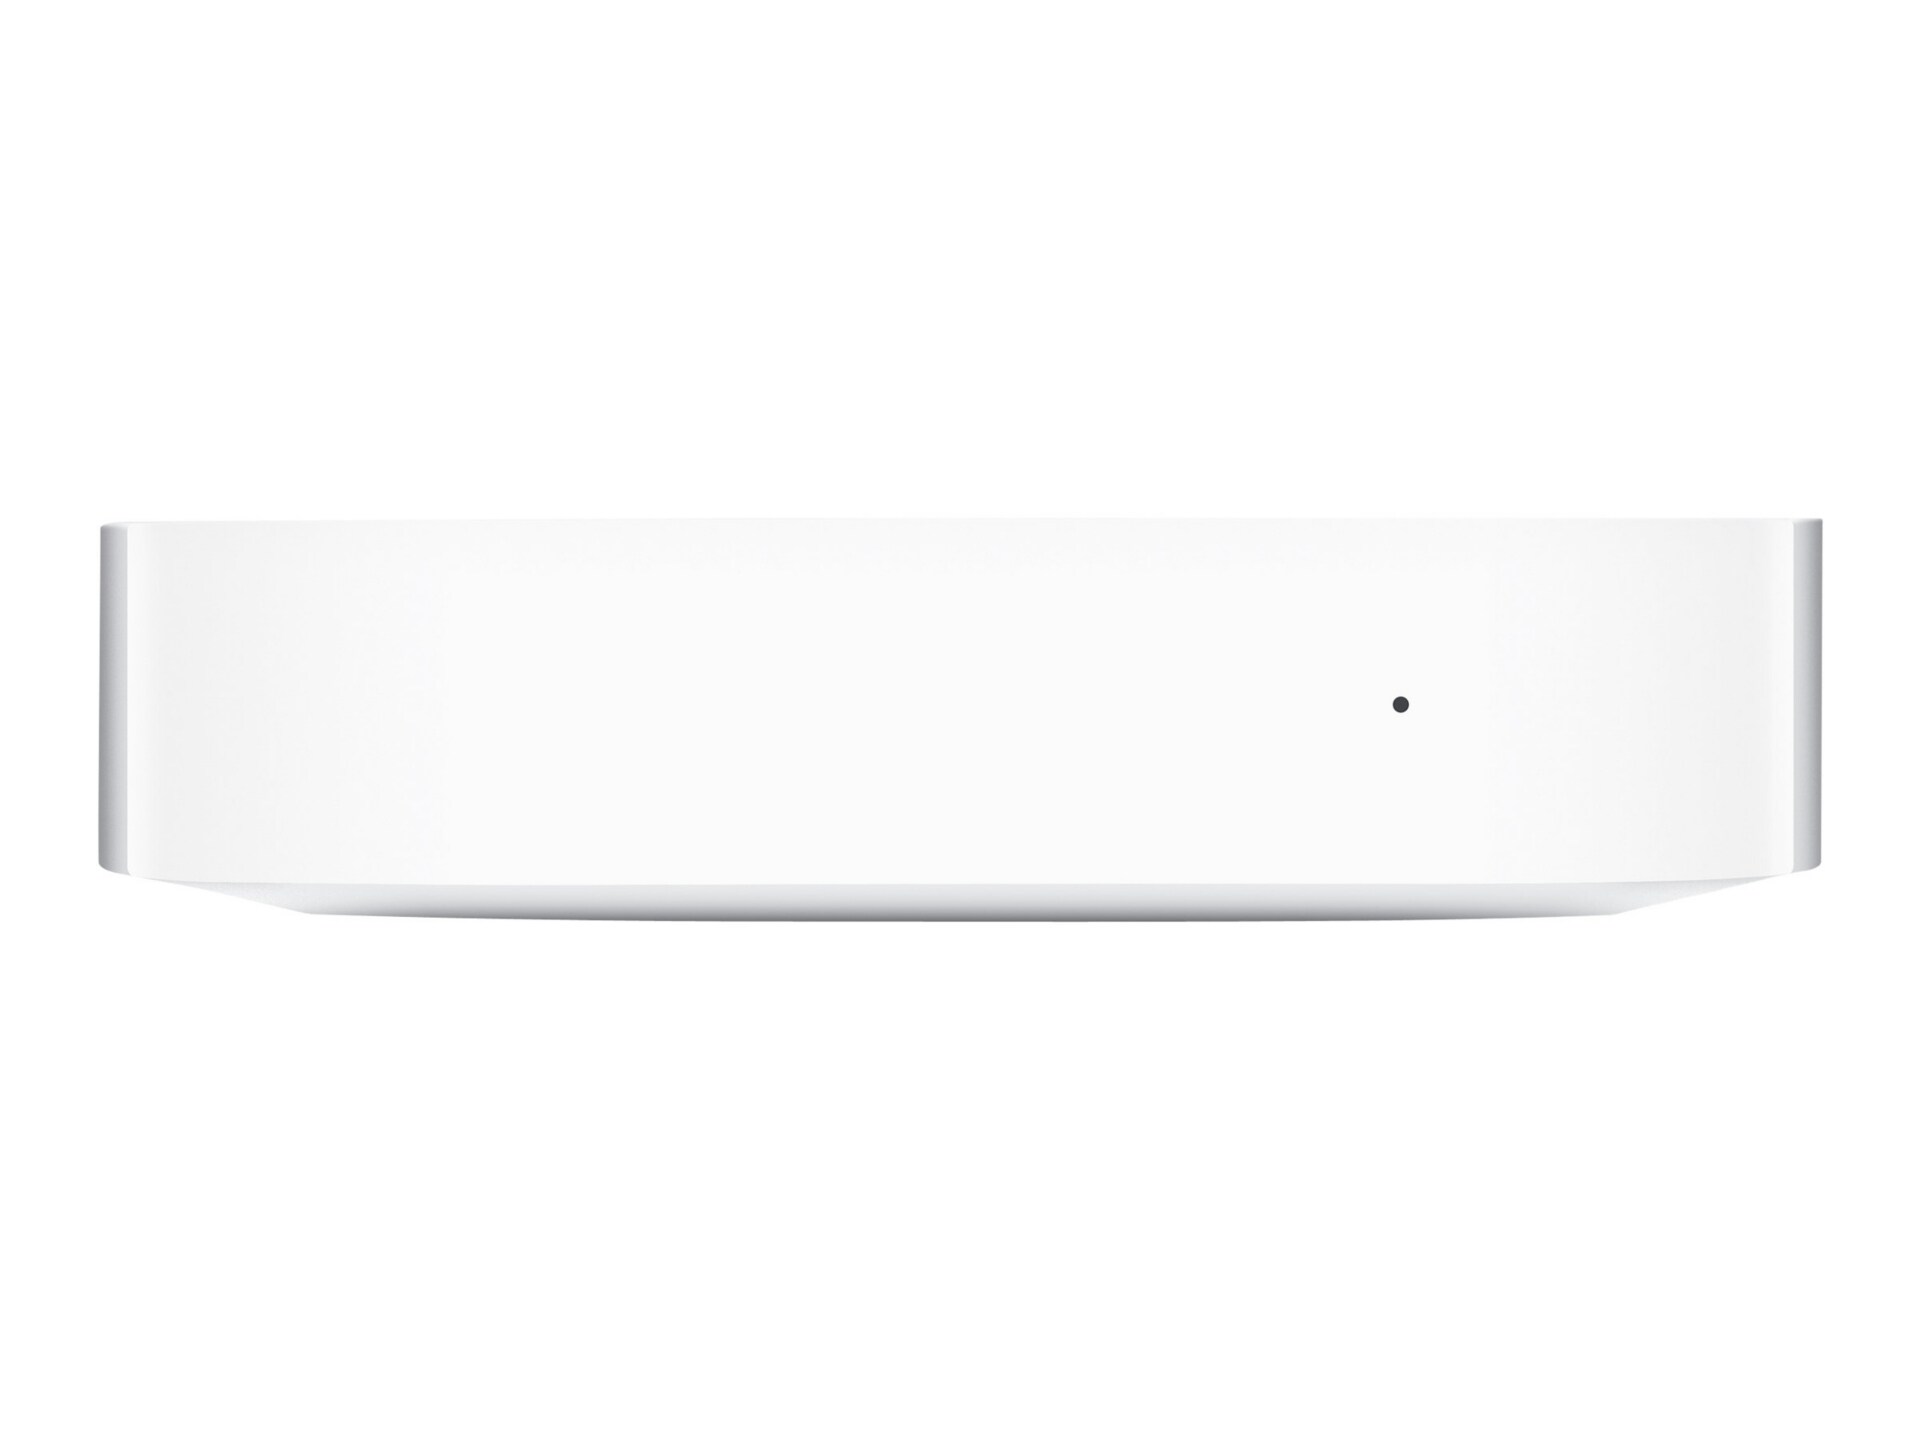 Apple AirPort Express Base Station Wireless Access Point